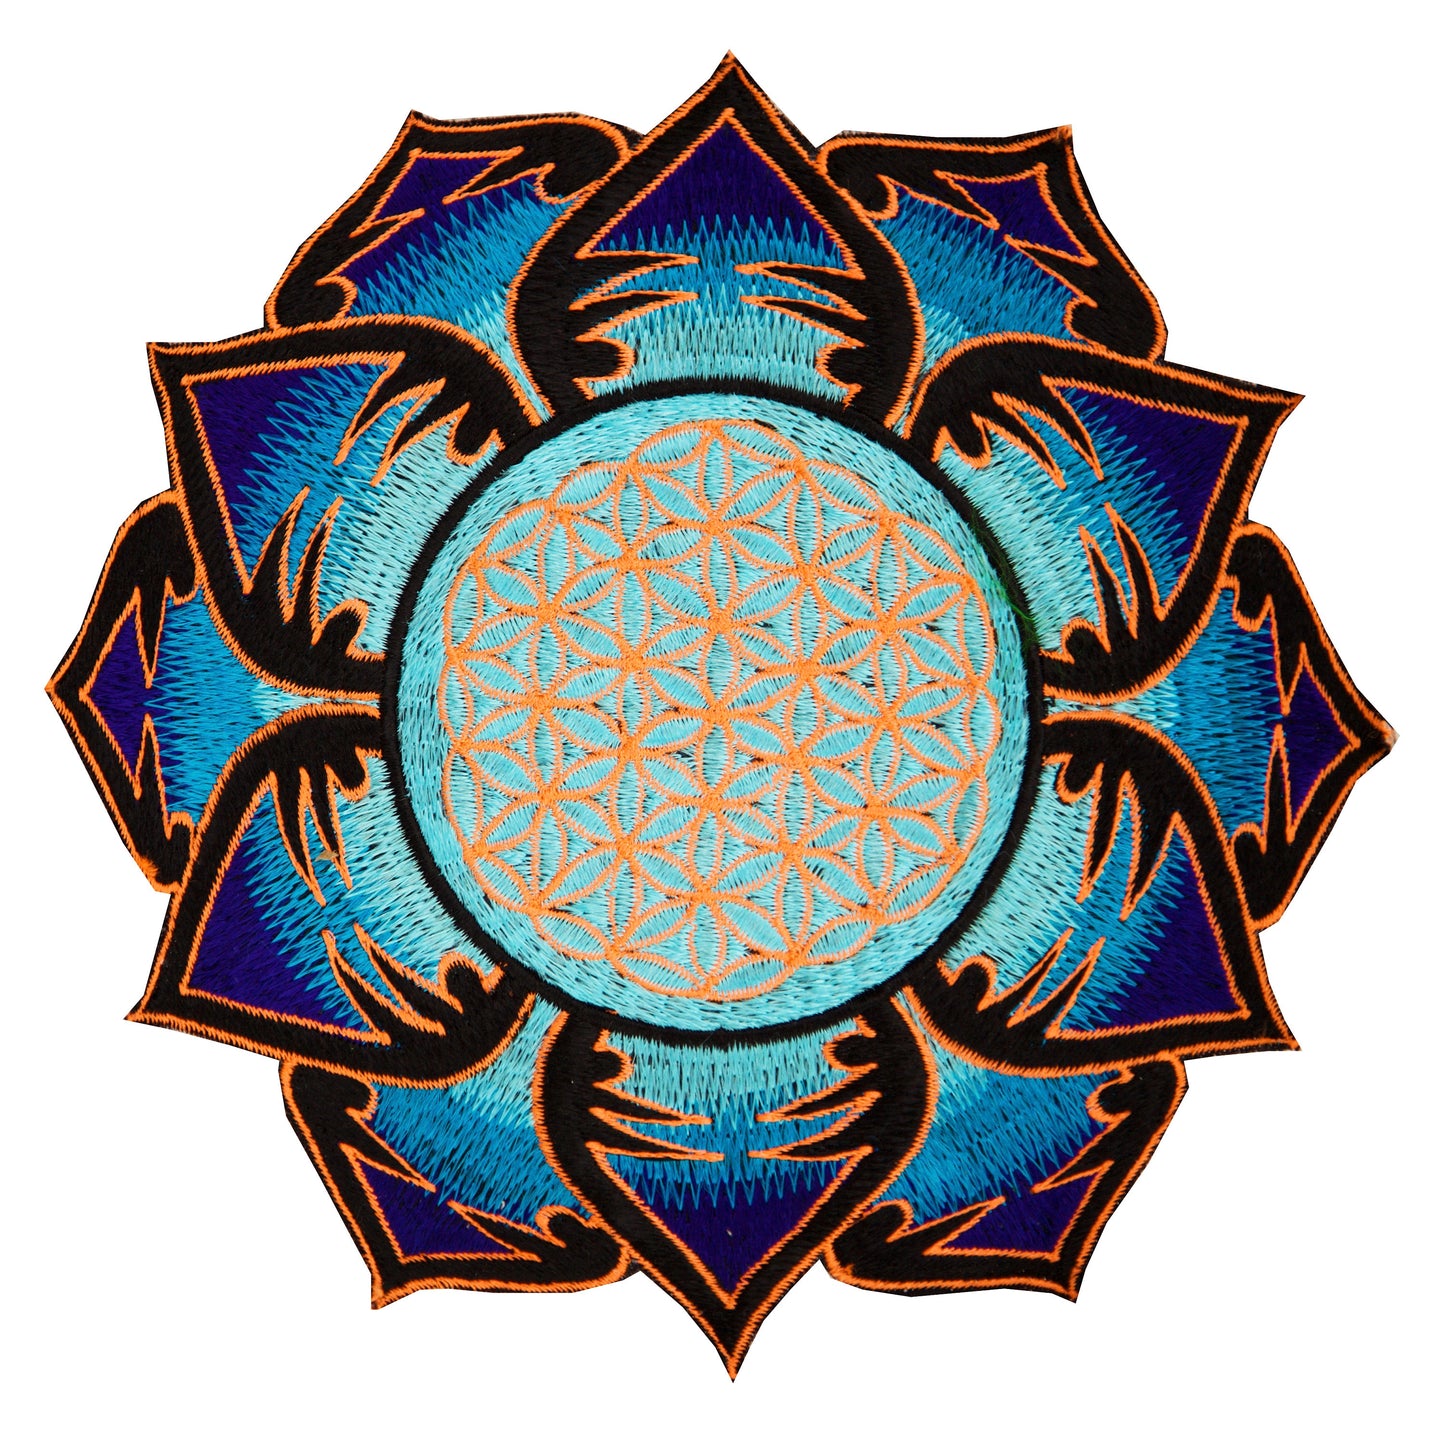 UV orange lightblue Flower of Life embroidery for sew on - holy geometry sacred blacklight glowing patch